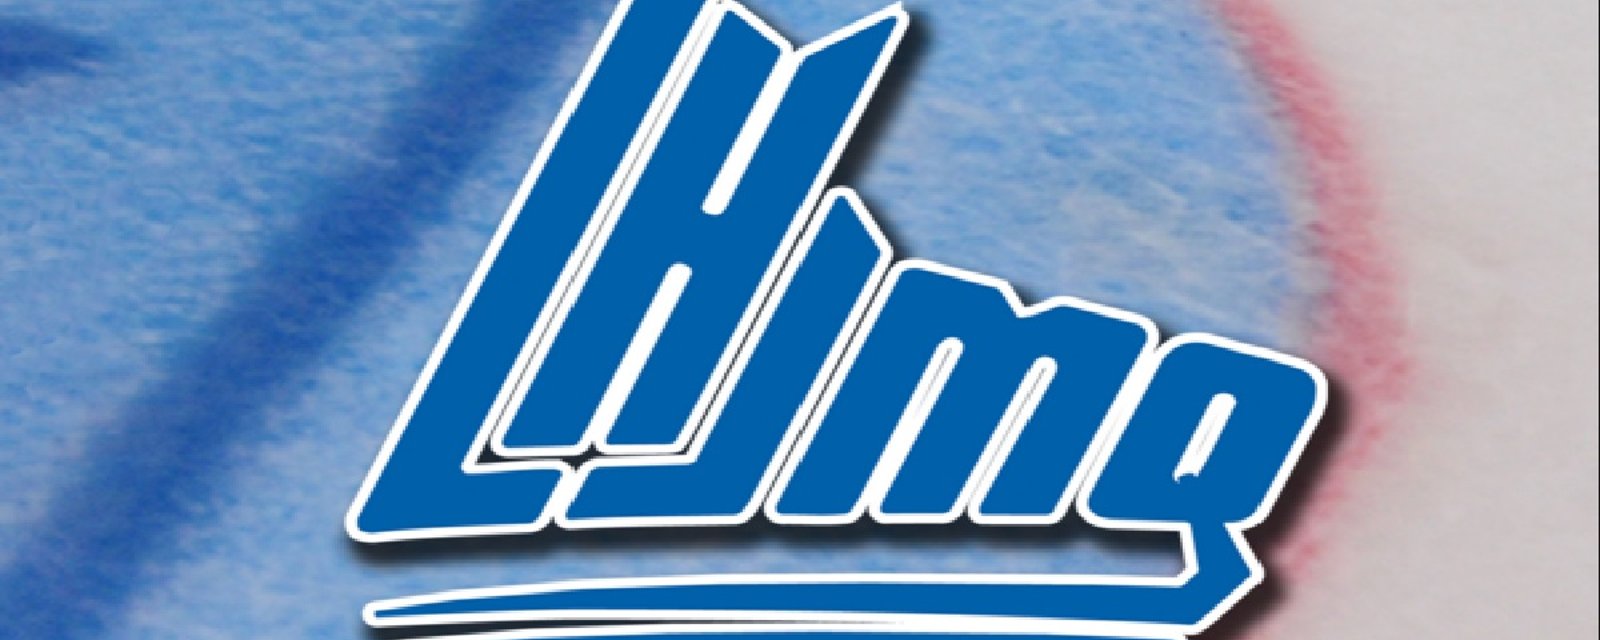 Breaking: QMJHL hands out 15-game suspension for DESPICABLE hit!